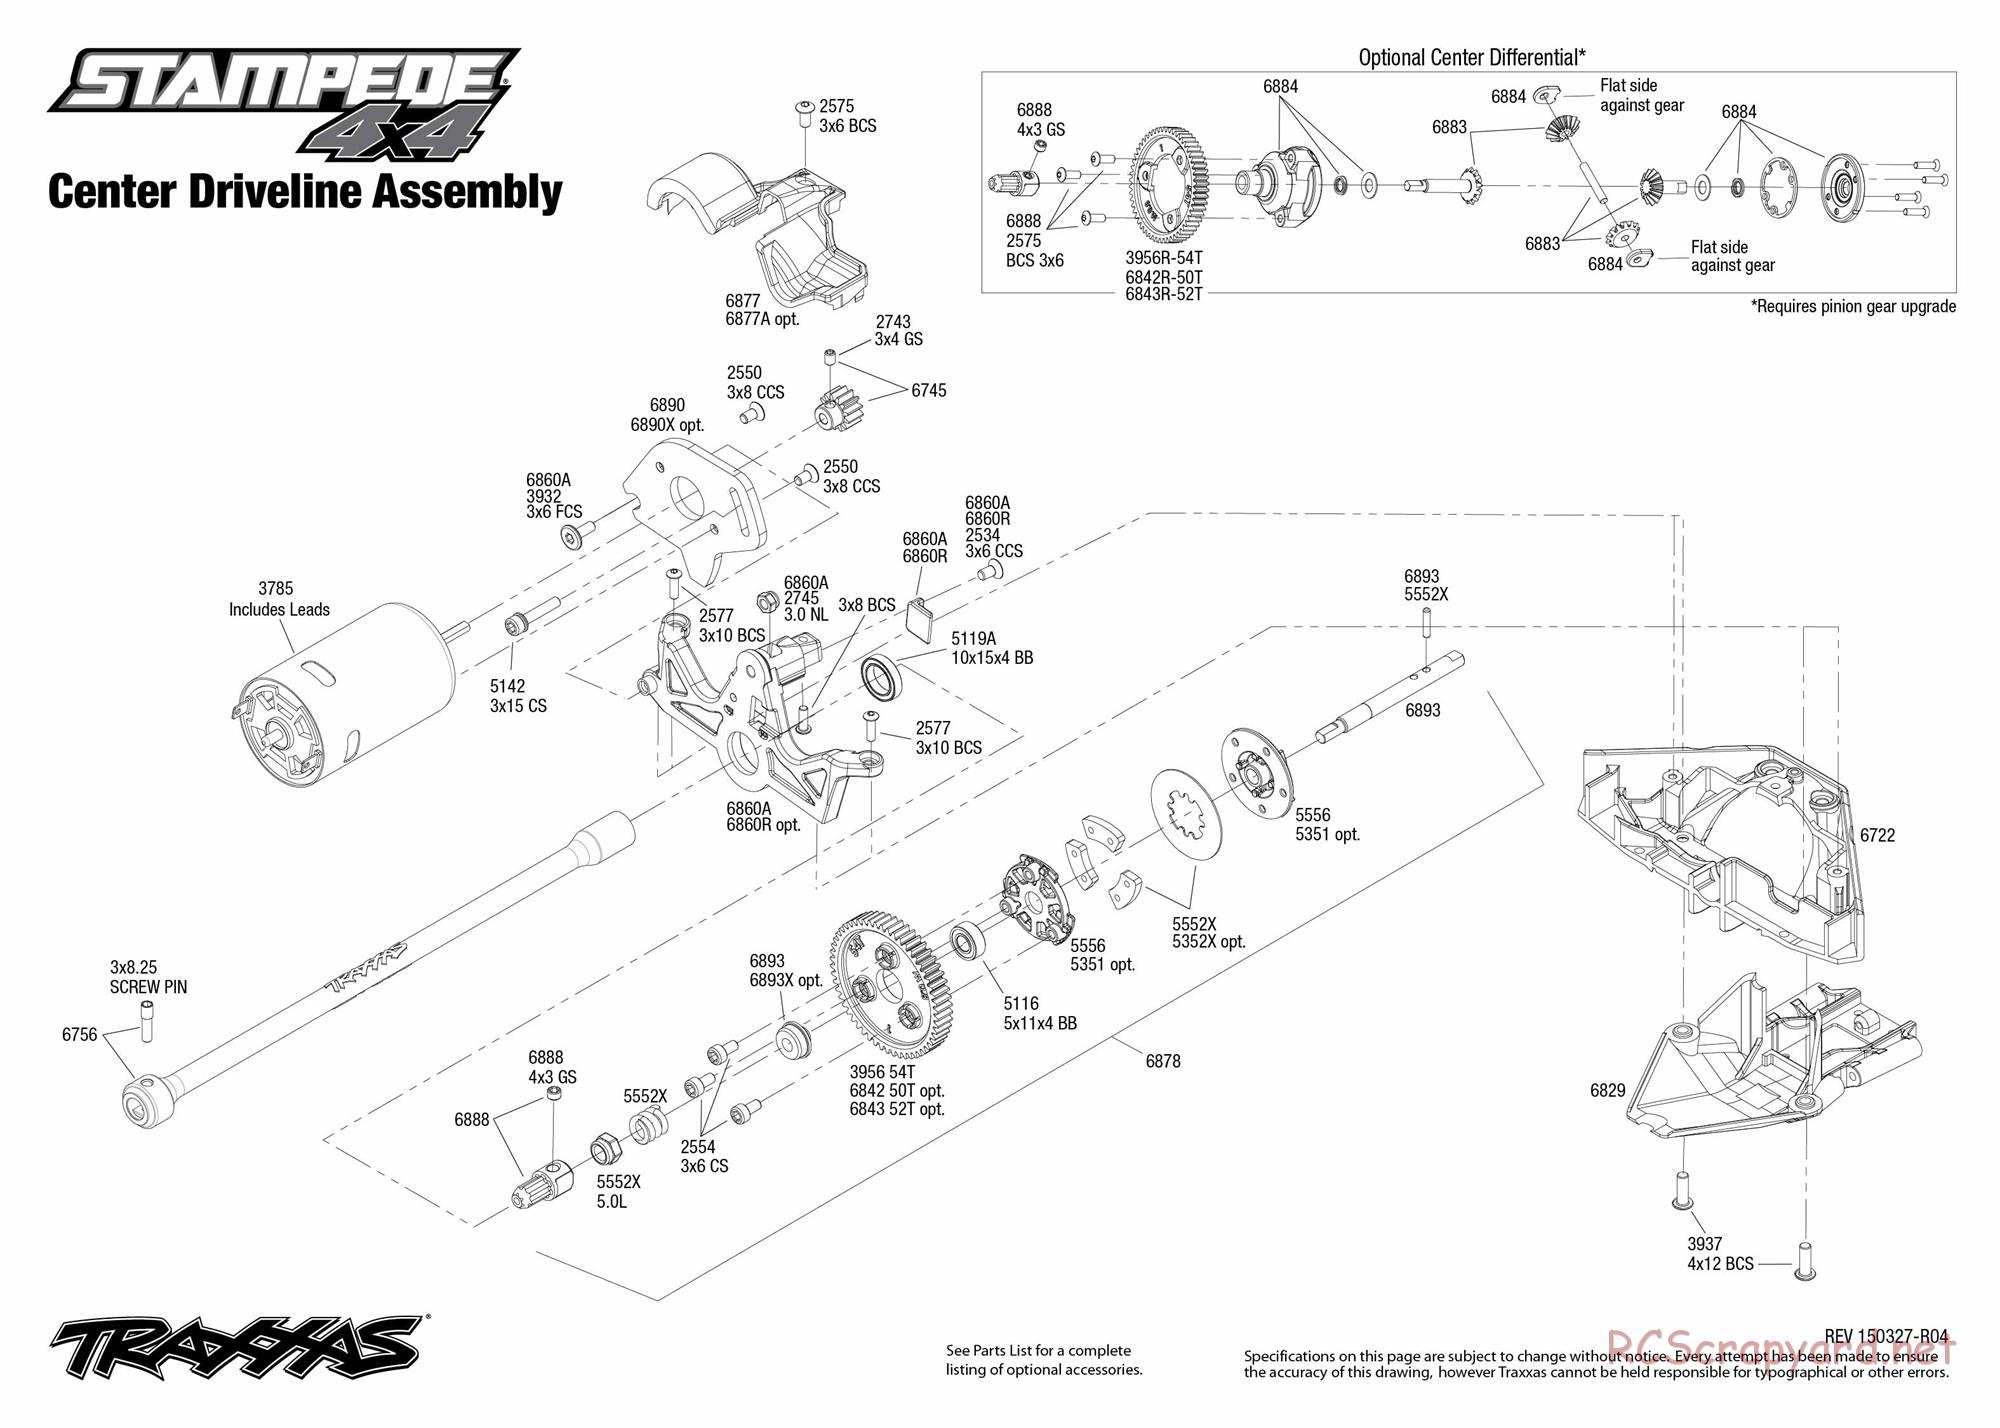 Traxxas - Stampede 4x4 (2013) - Exploded Views - Page 3